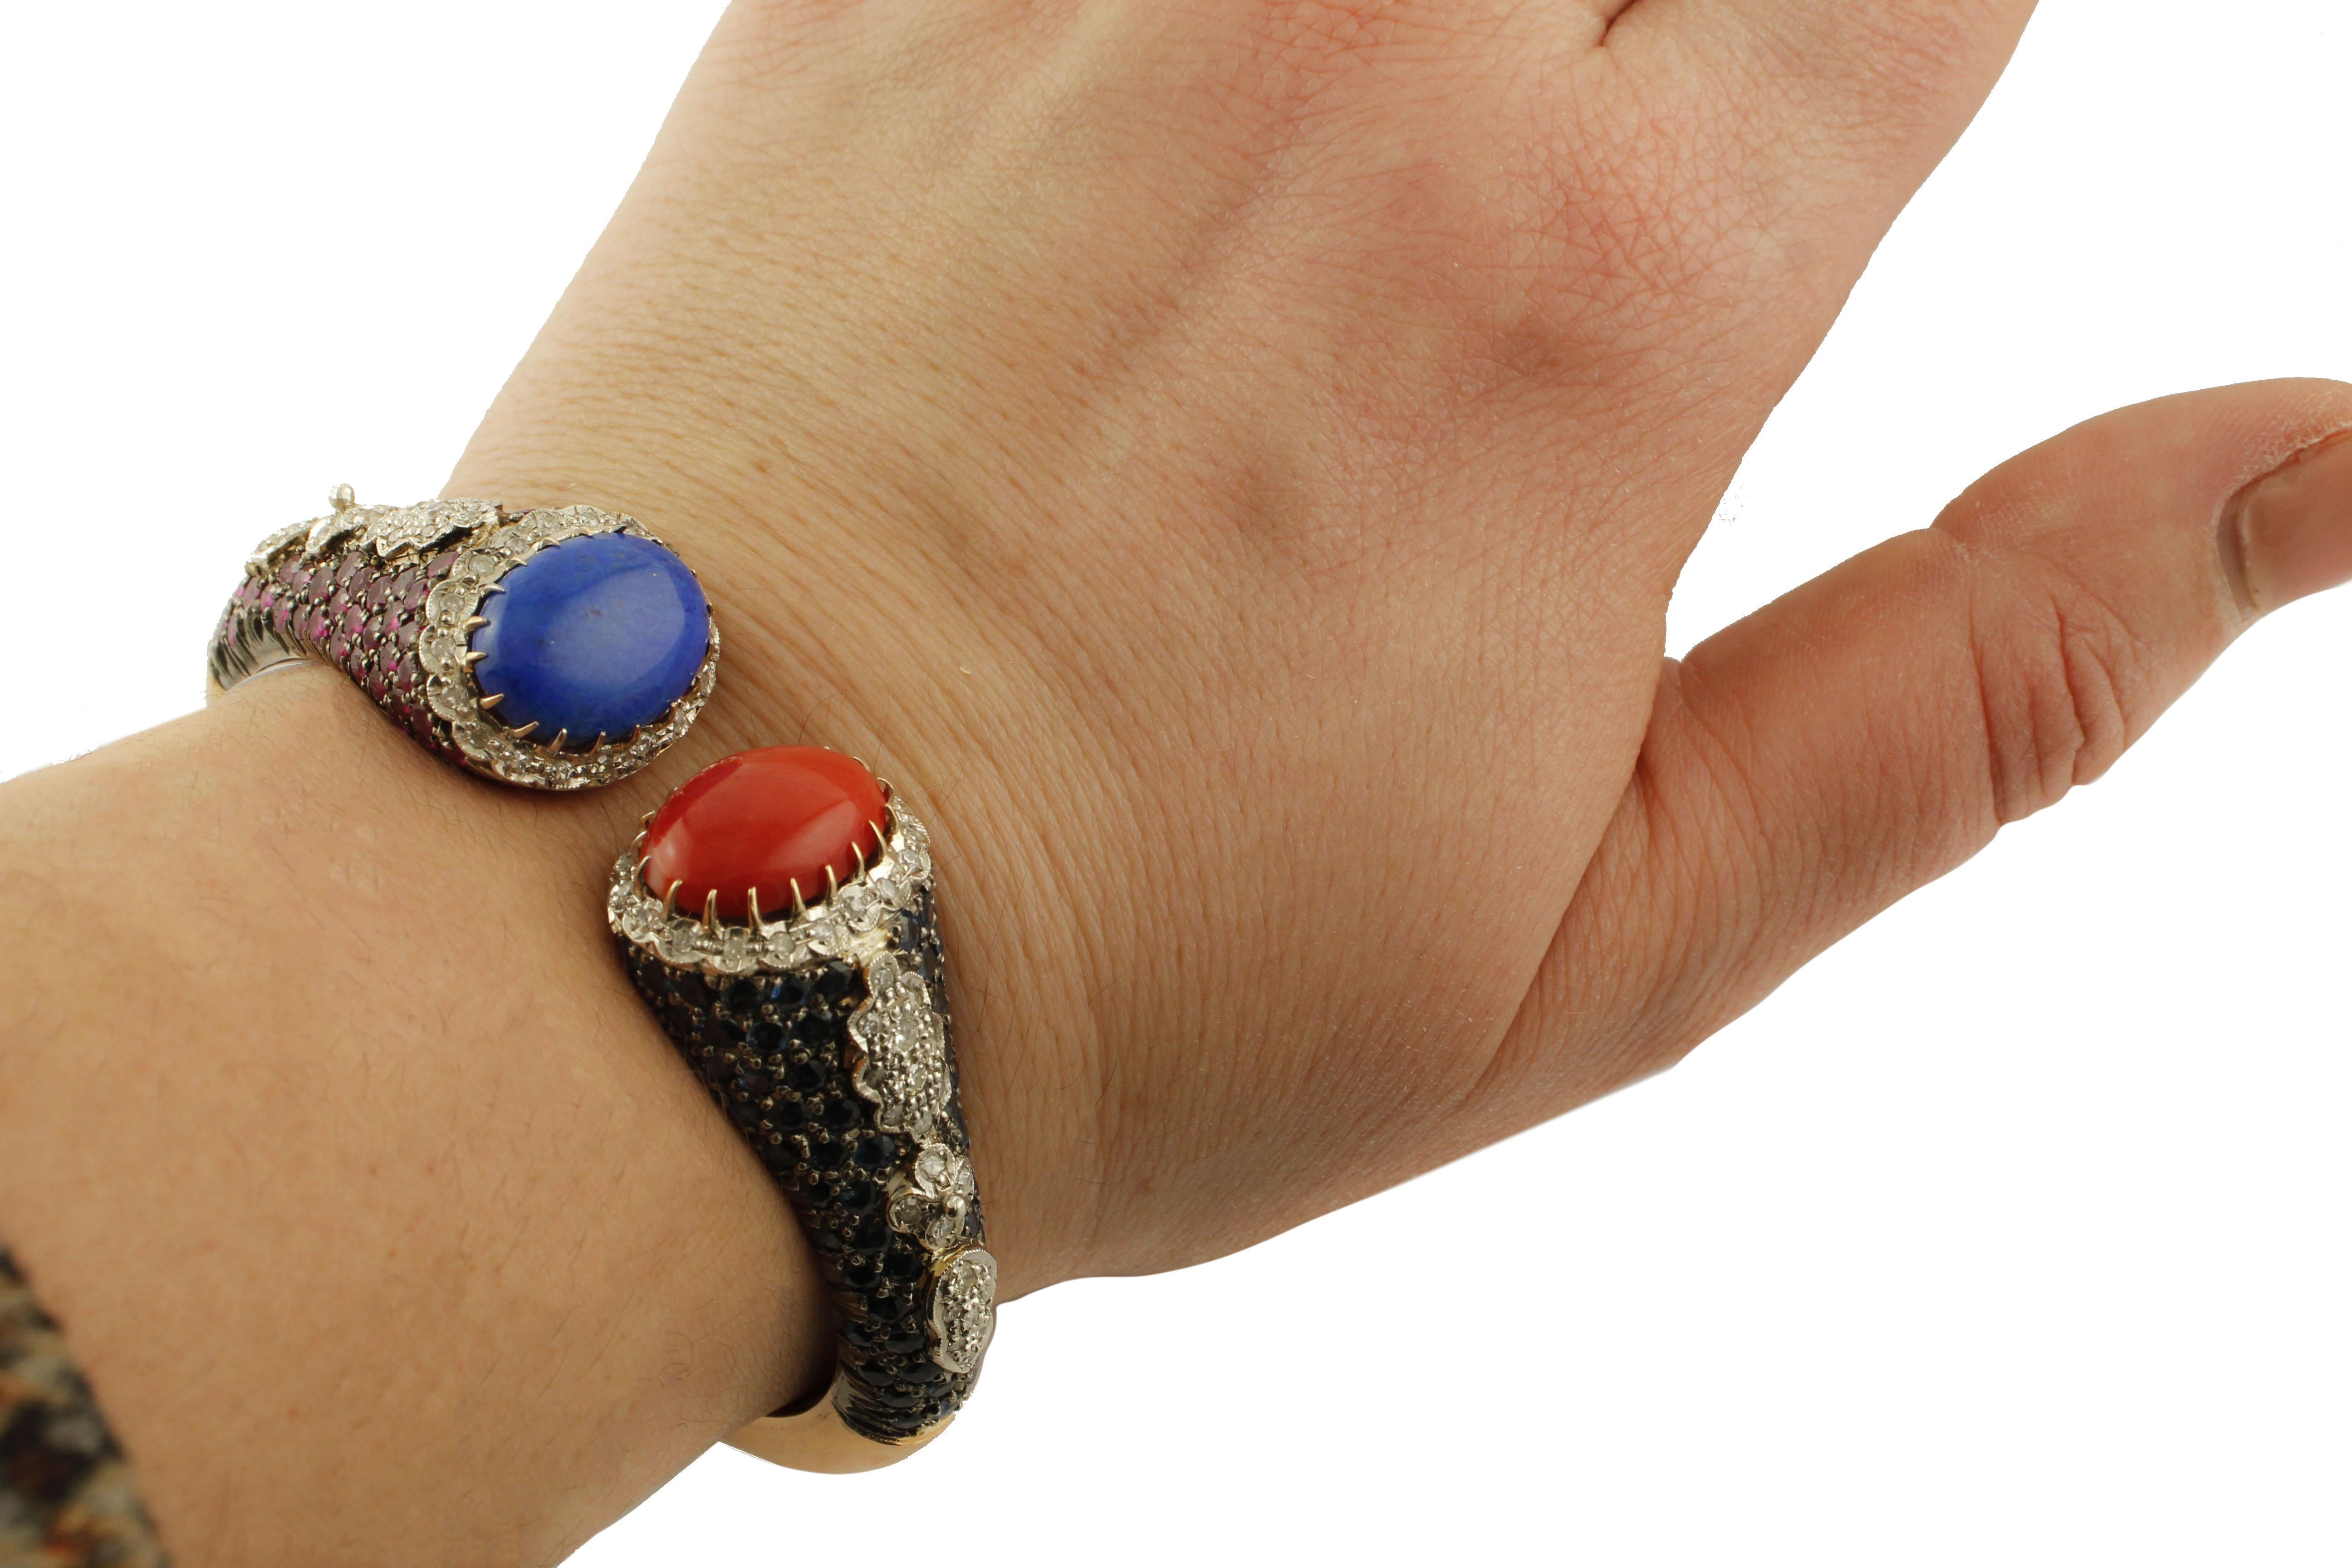 Diamonds, Rubies, Sapphires, Red Coral, Lapis Rose Gold Silver Cuff Bracelet 1